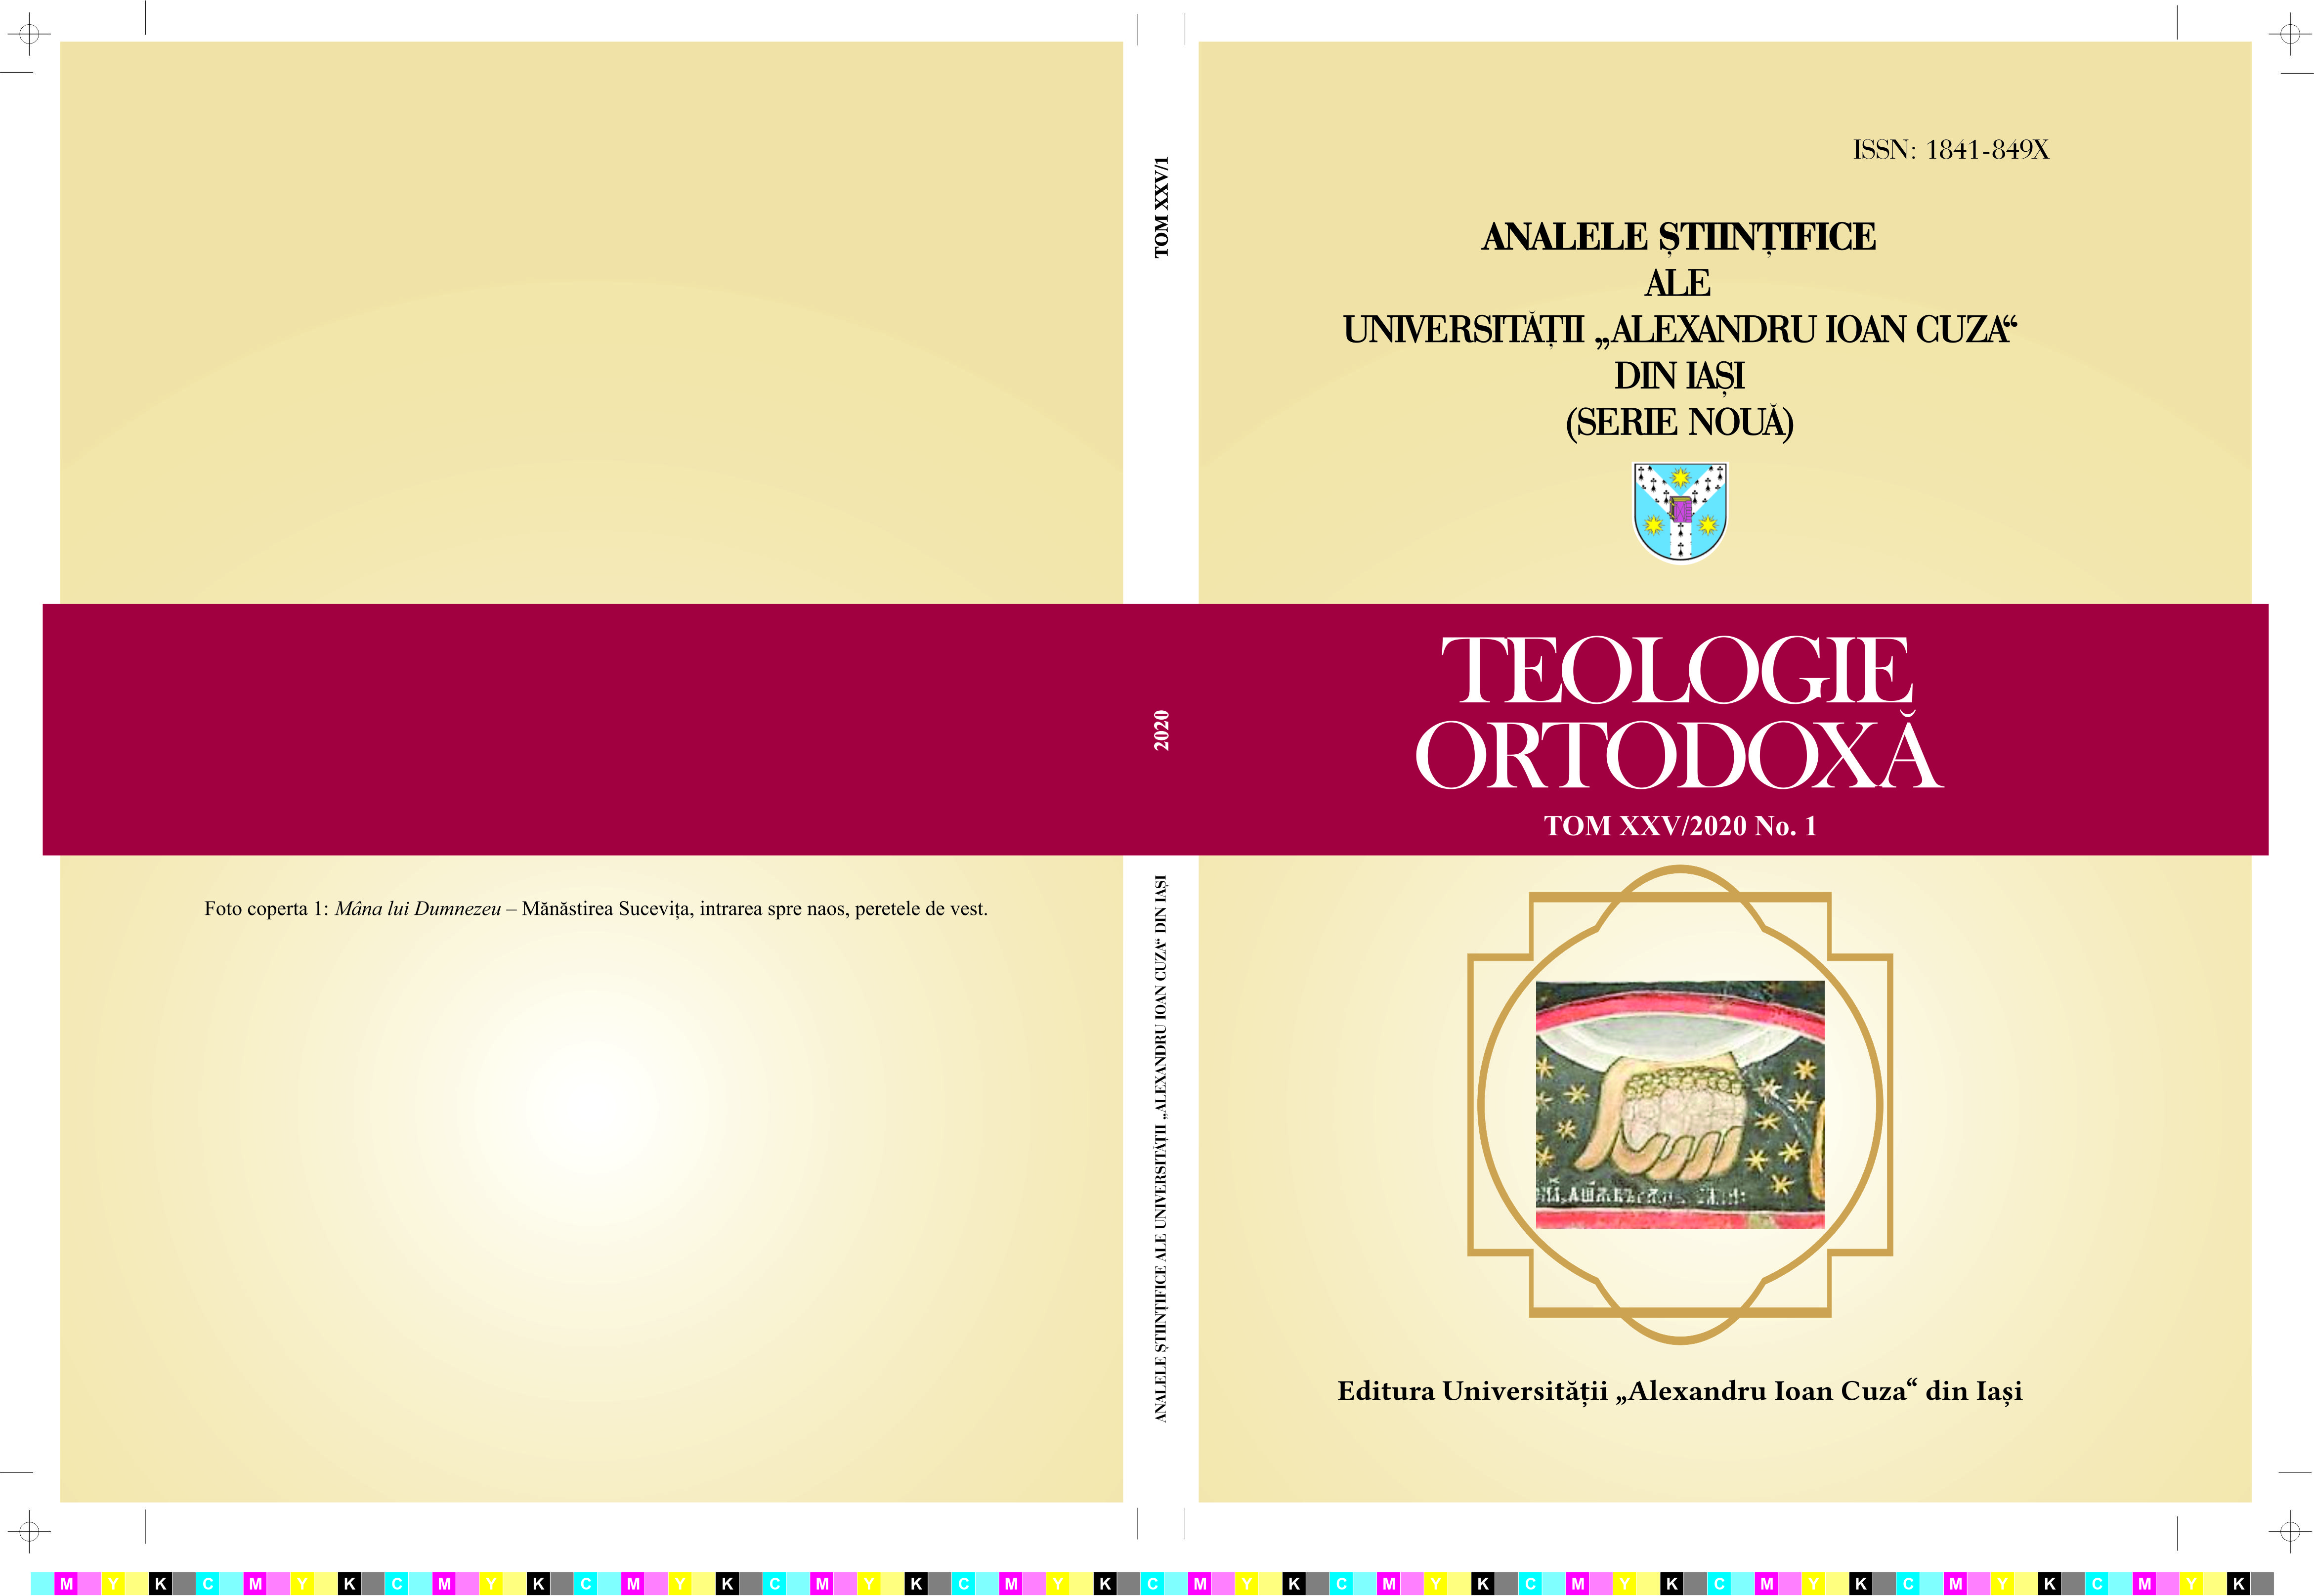 The Theology of Matter – A Matter of Orthodox Theology. Marginal Contributions of Fr. Dumitru Staniloae Cover Image